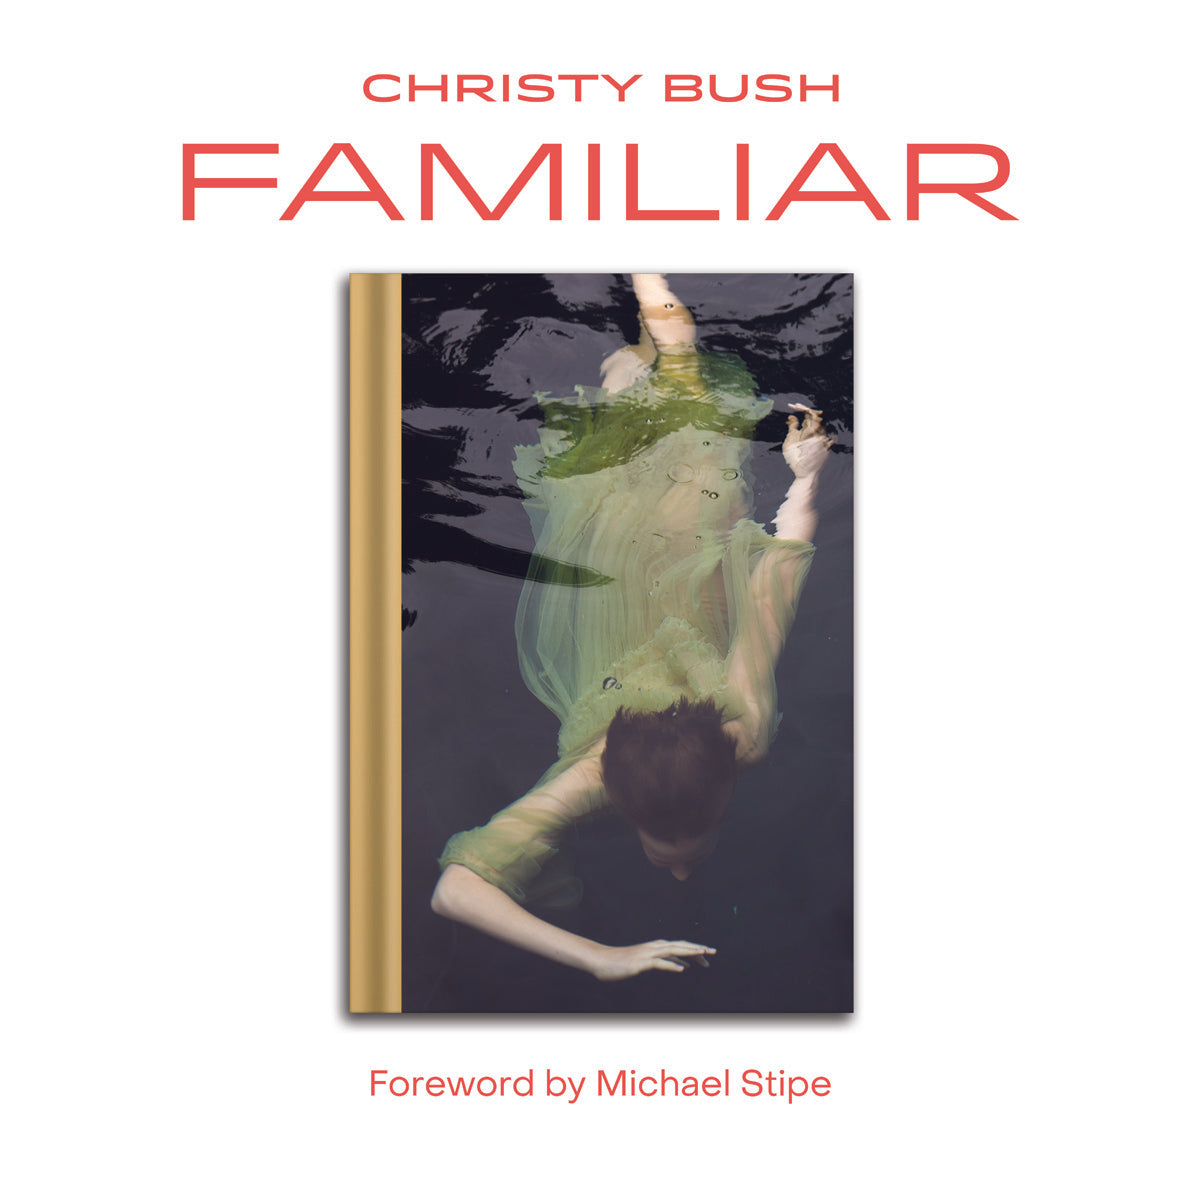 Familiar by Christy Bush / Foreword by Michael Stipe